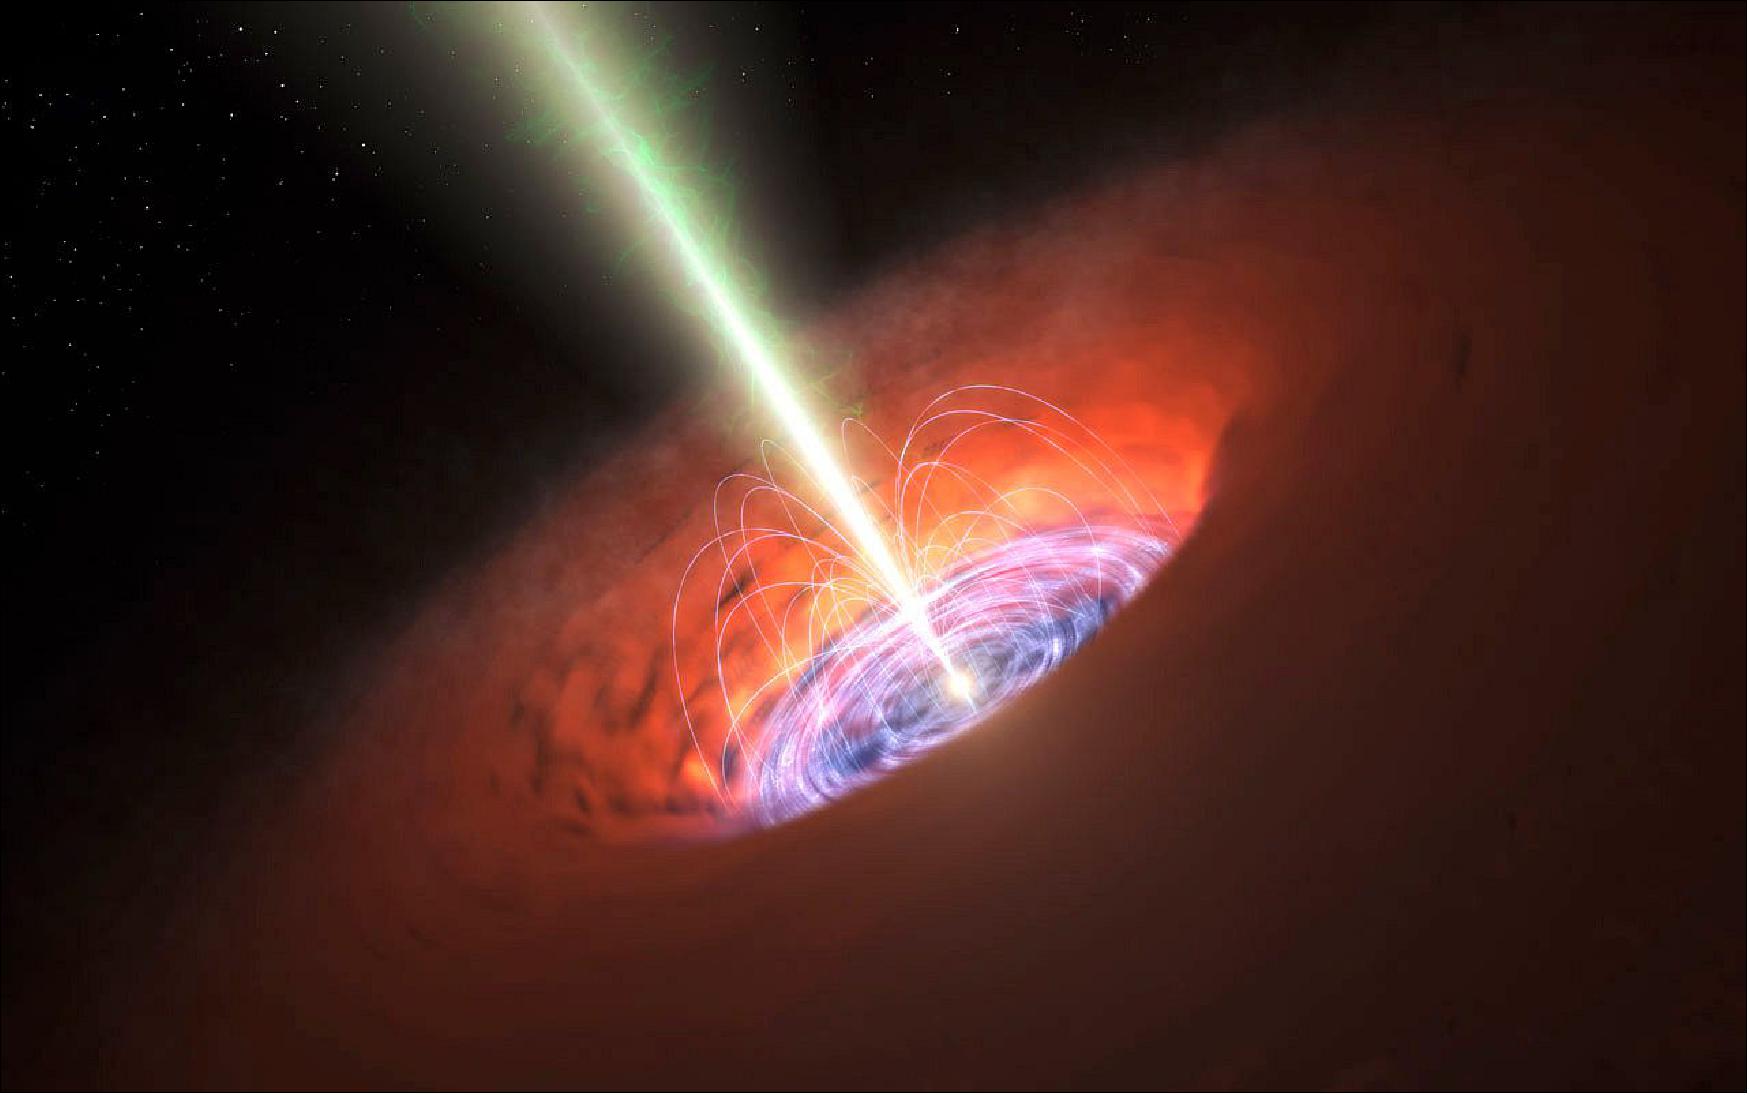 Figure 58: This artist's impression shows the surroundings of a supermassive black hole, typical of that found at the heart of many galaxies. The black hole itself is surrounded by a brilliant accretion disc of very hot, infalling material and, further out, a dusty torus. There are also often high-speed jets of material ejected at the black hole's poles that can extend huge distances into space. Observations with ALMA have detected a very strong magnetic field close to the black hole at the base of the jets and this is probably involved in jet production and collimation (image credit: ALMA,ESO/NAOJ/NRAO)